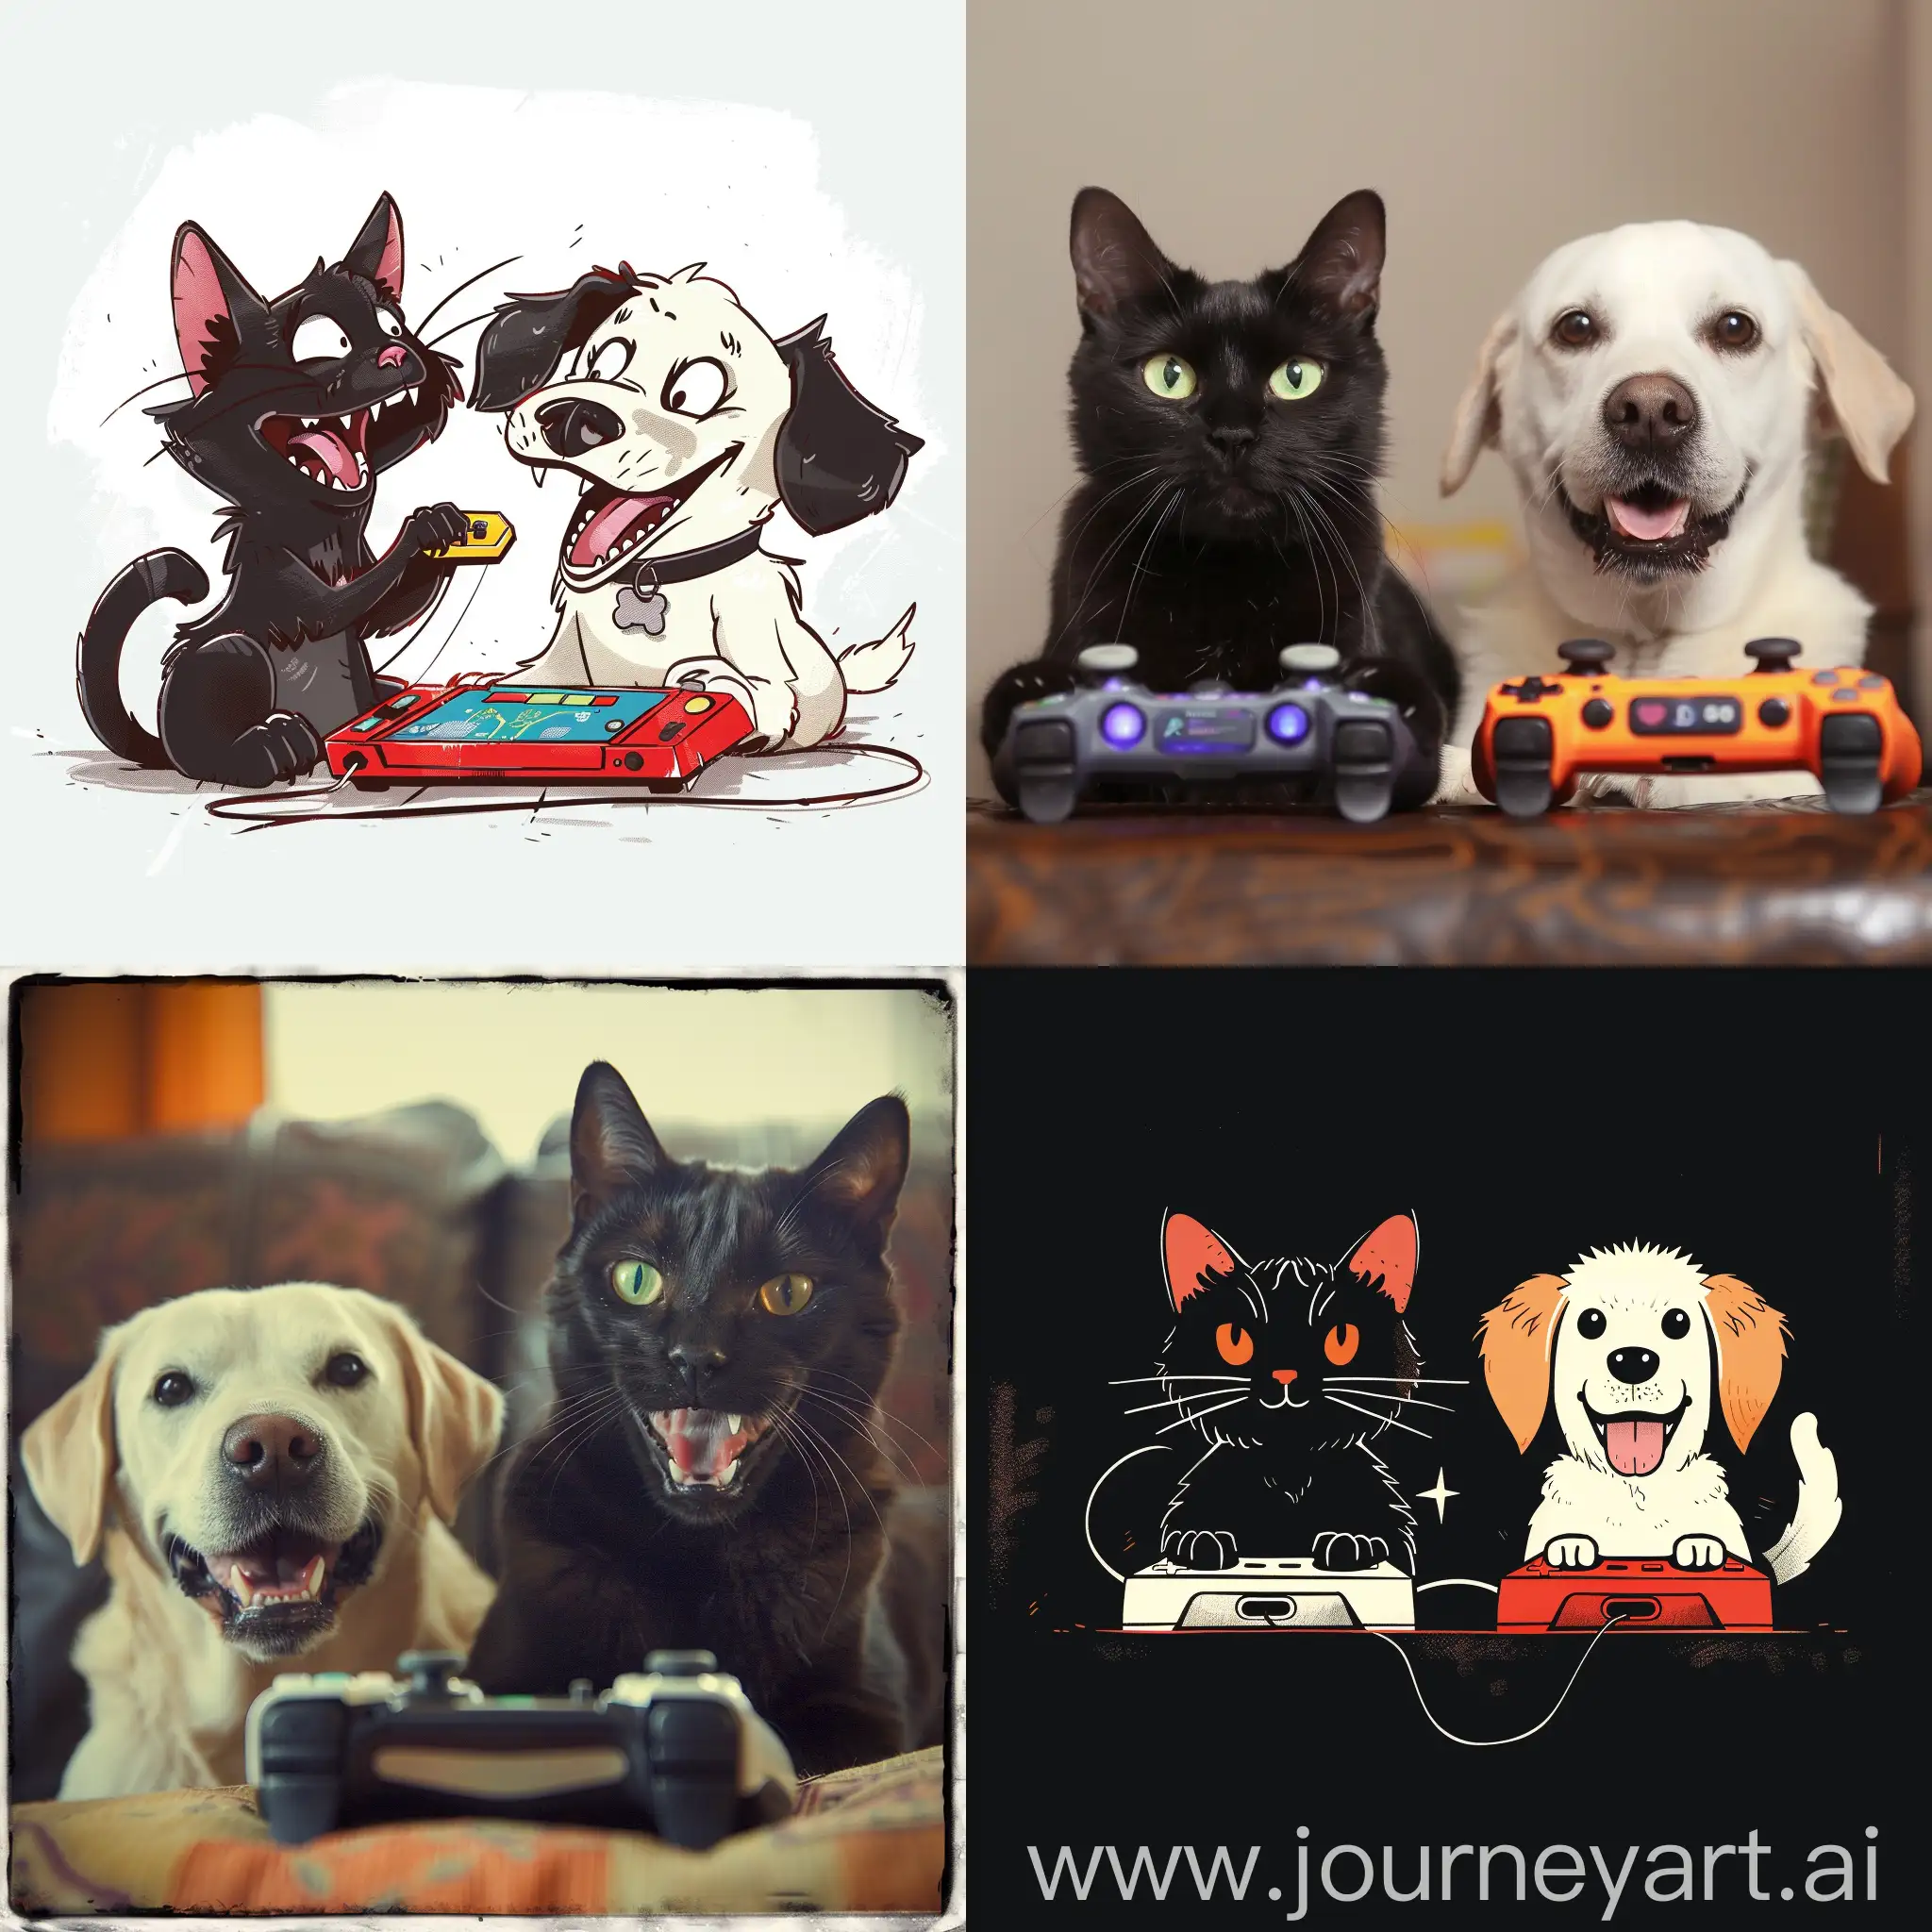 Black-Cat-and-White-Dog-Playing-Video-Games